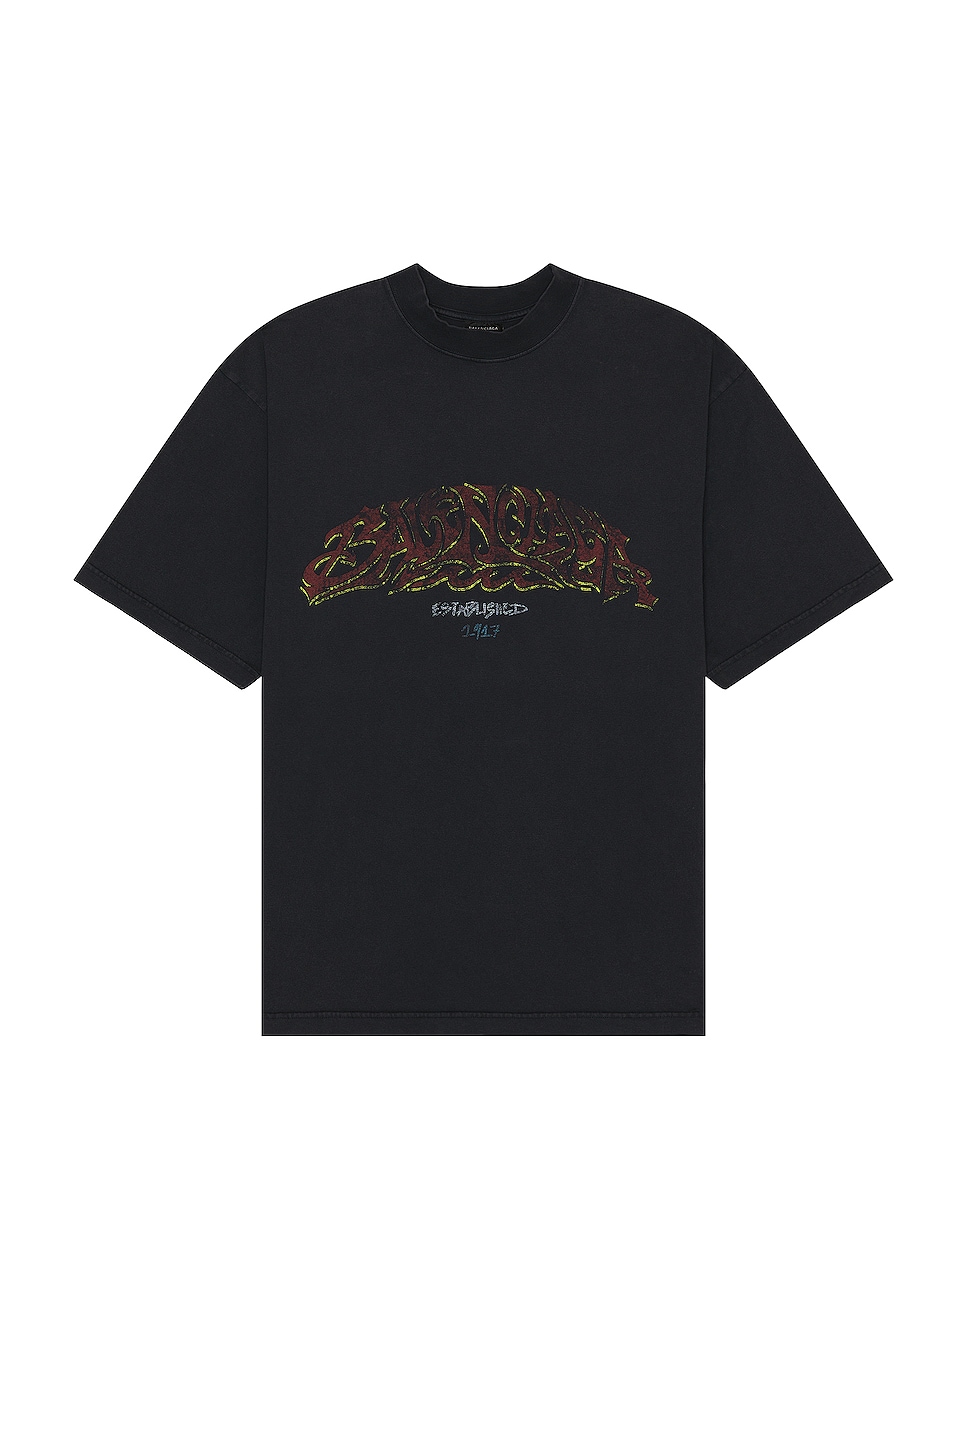 Image 1 of Balenciaga Medium Fit T-shirt in Faded Black & Red